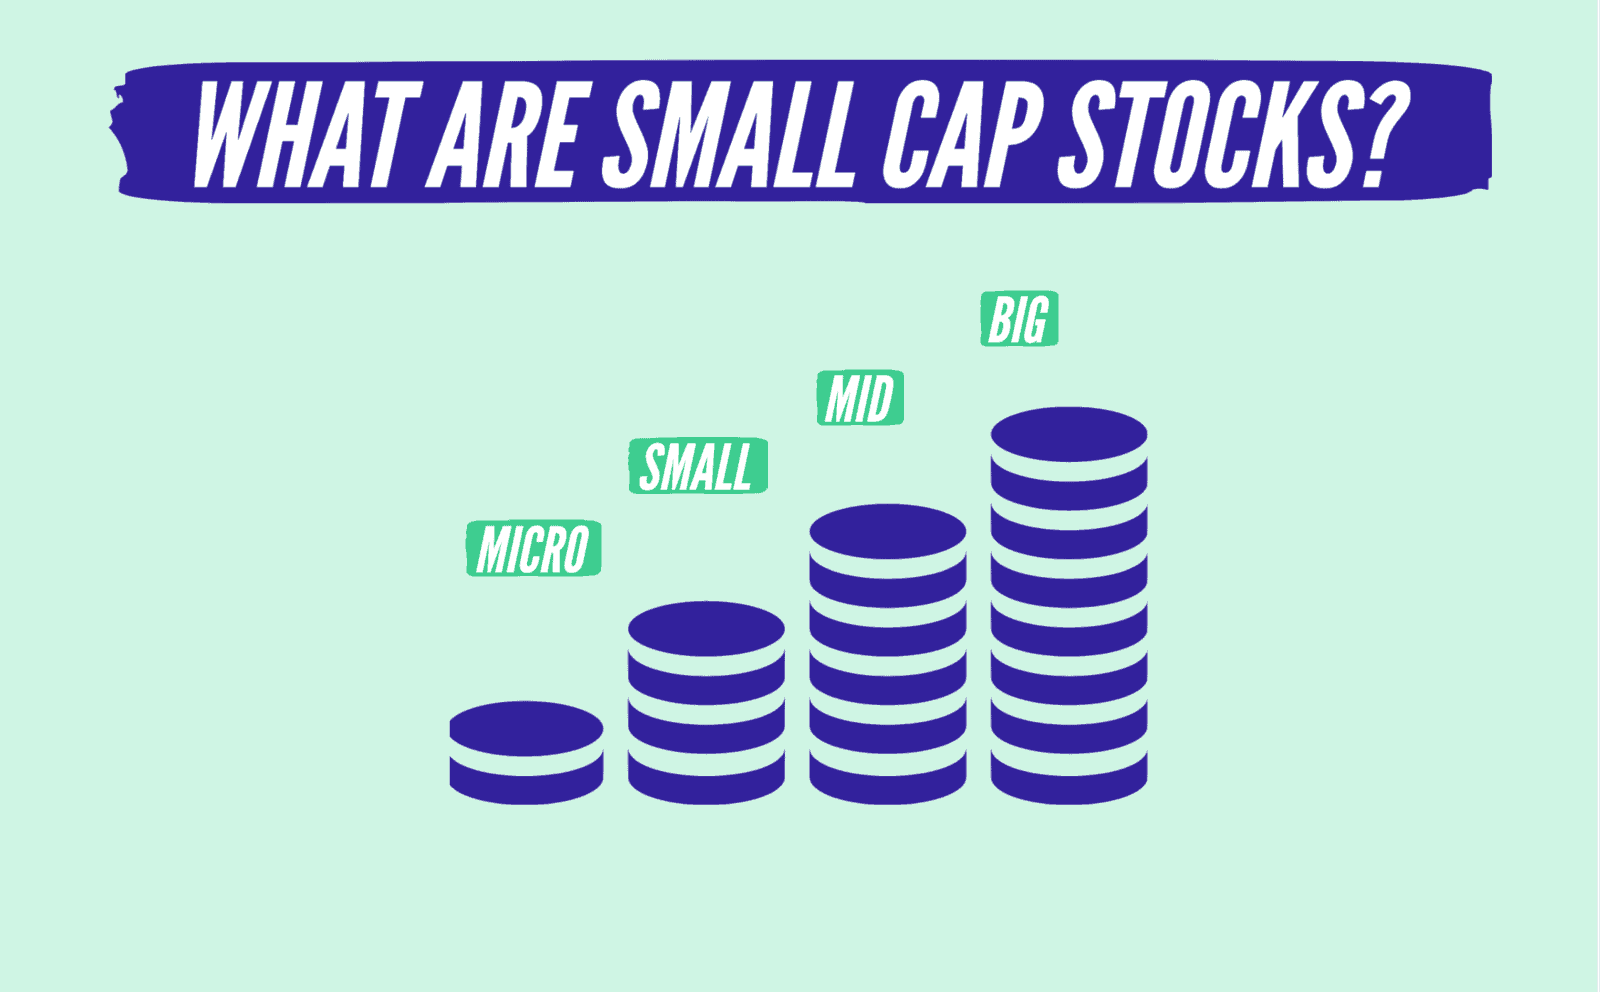 What are small cap stocks